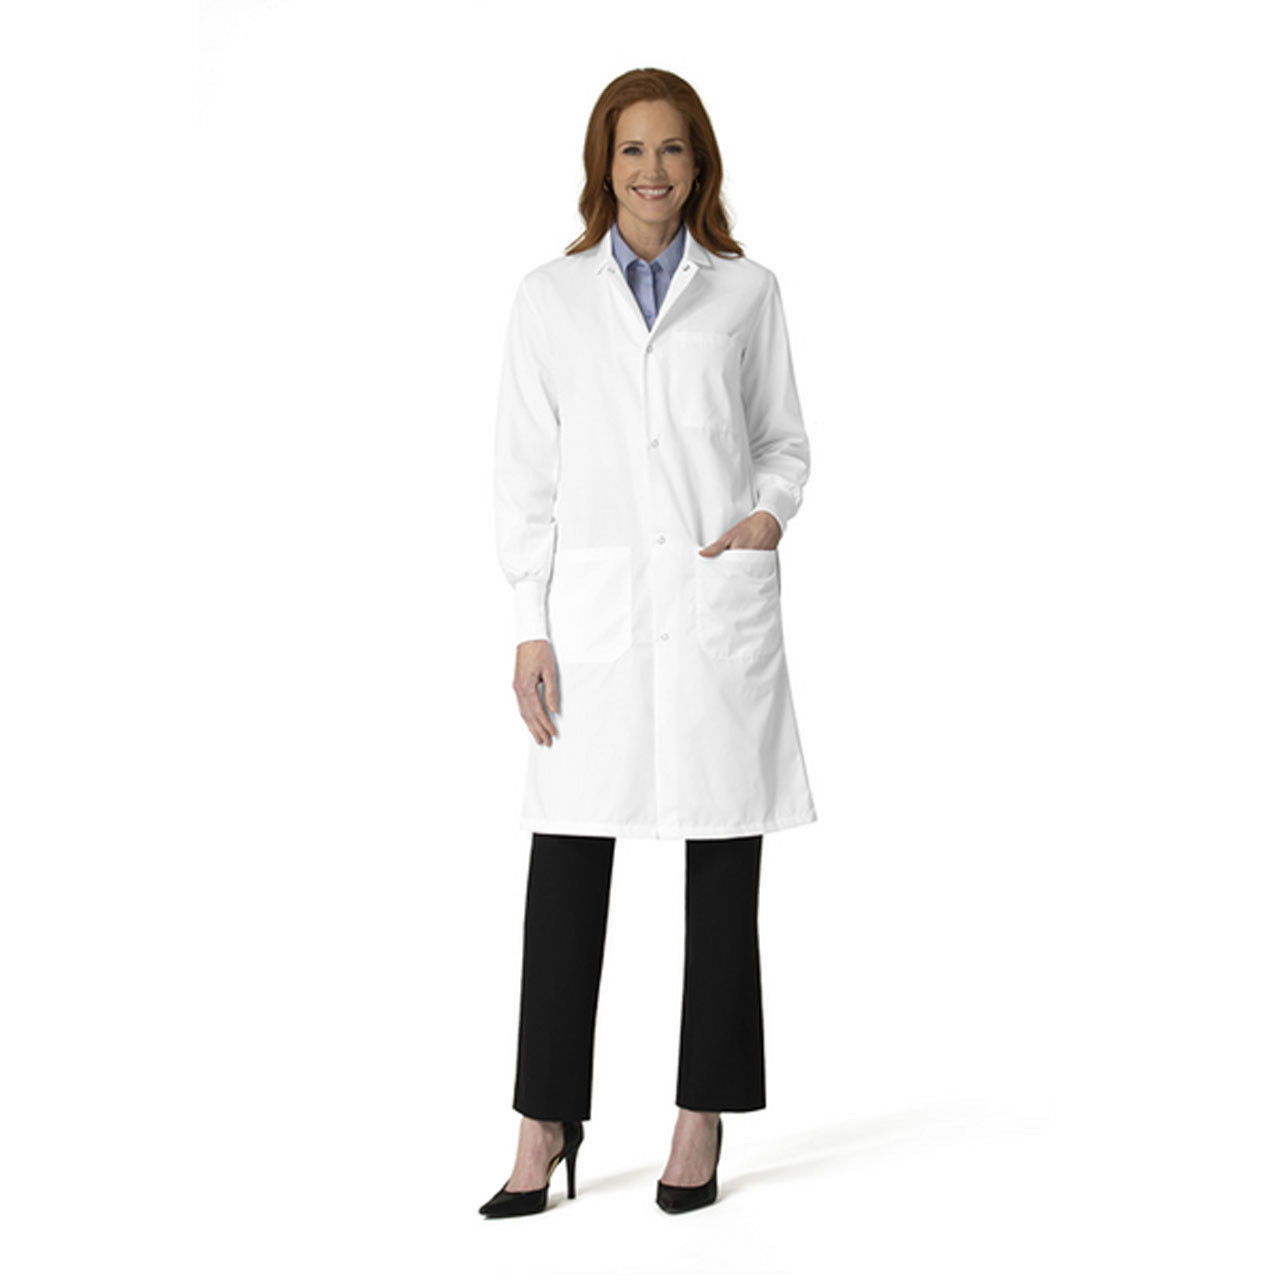 Unisex White Lab Coat with Snaps and Knit Cuffs - Bulk case of 36